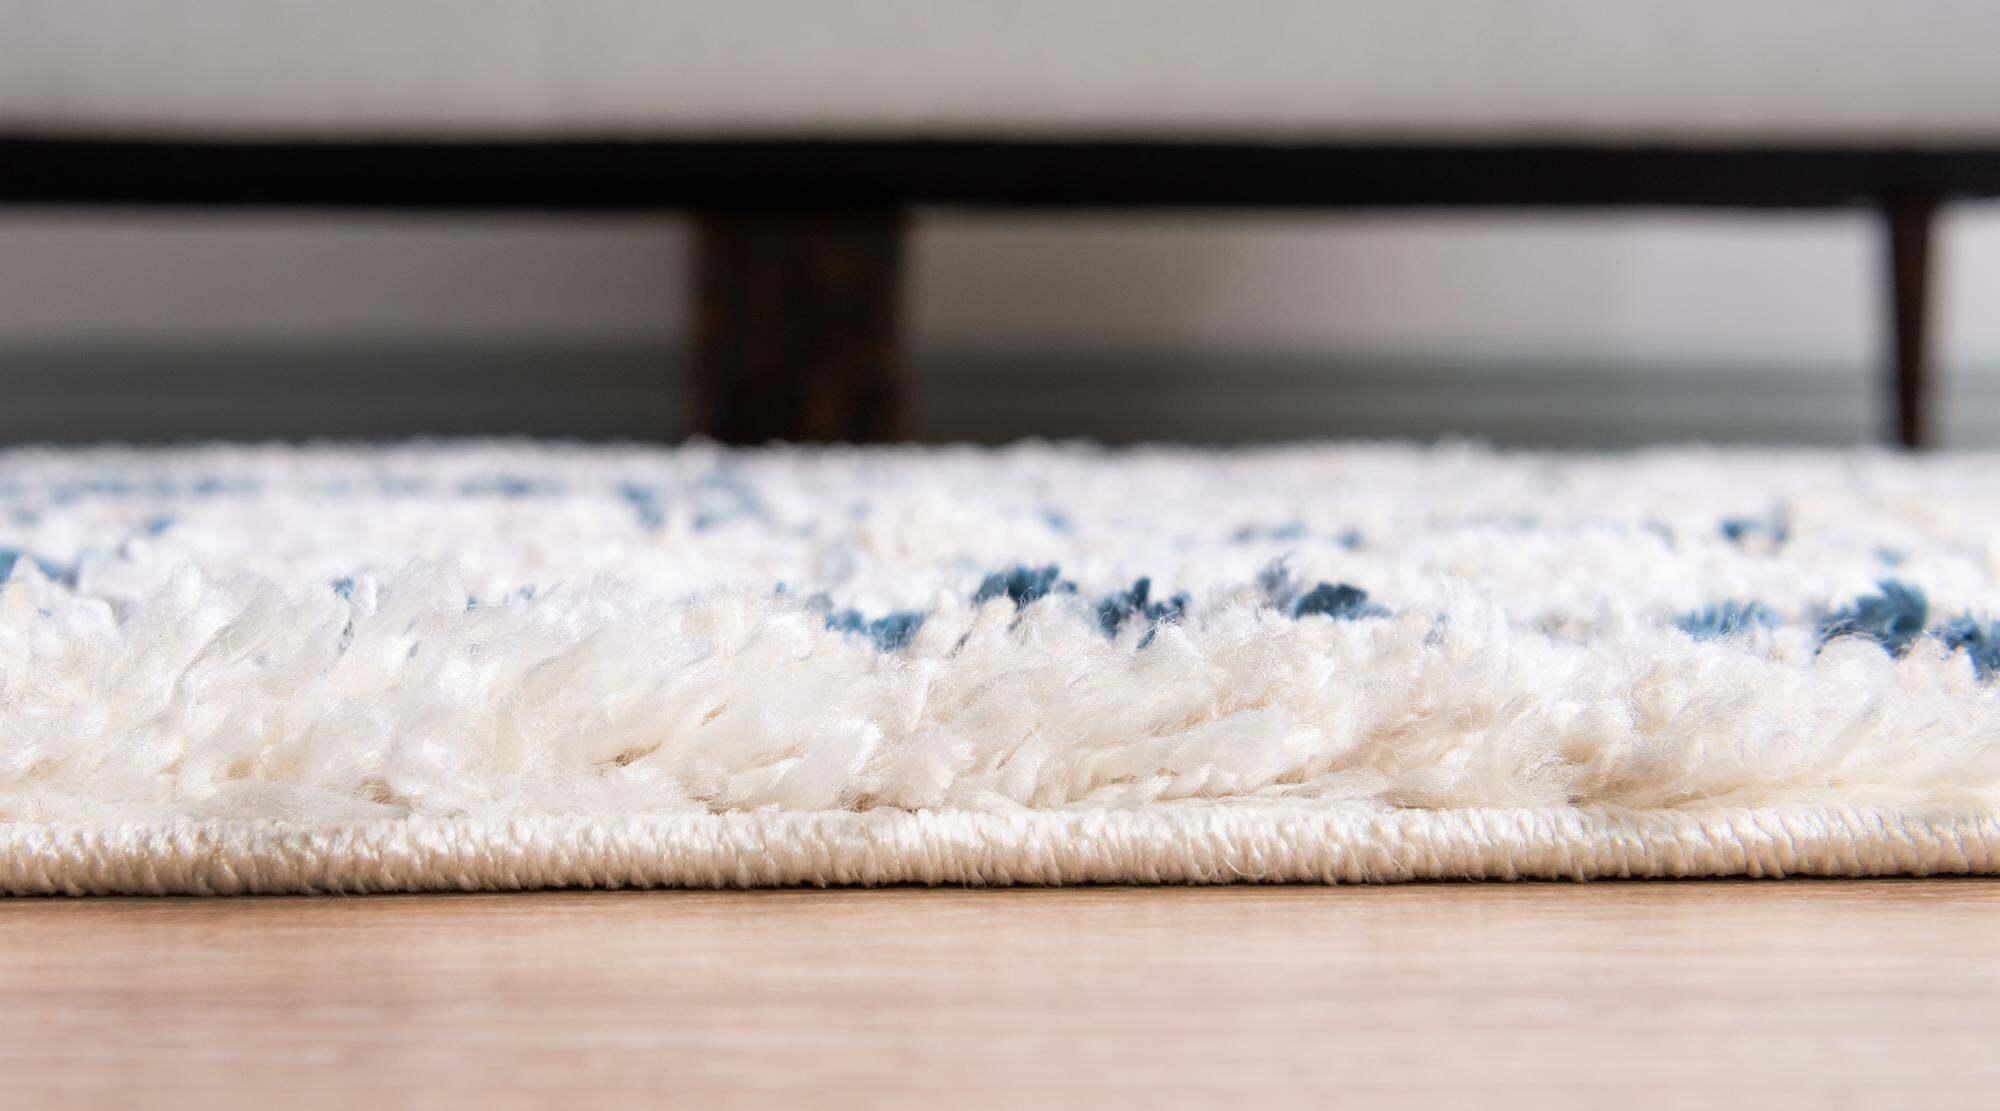 Unique Loom Indoor Rugs - Hygge Shag Abstract Rectangular 8x10 Rug Blue & Ivory